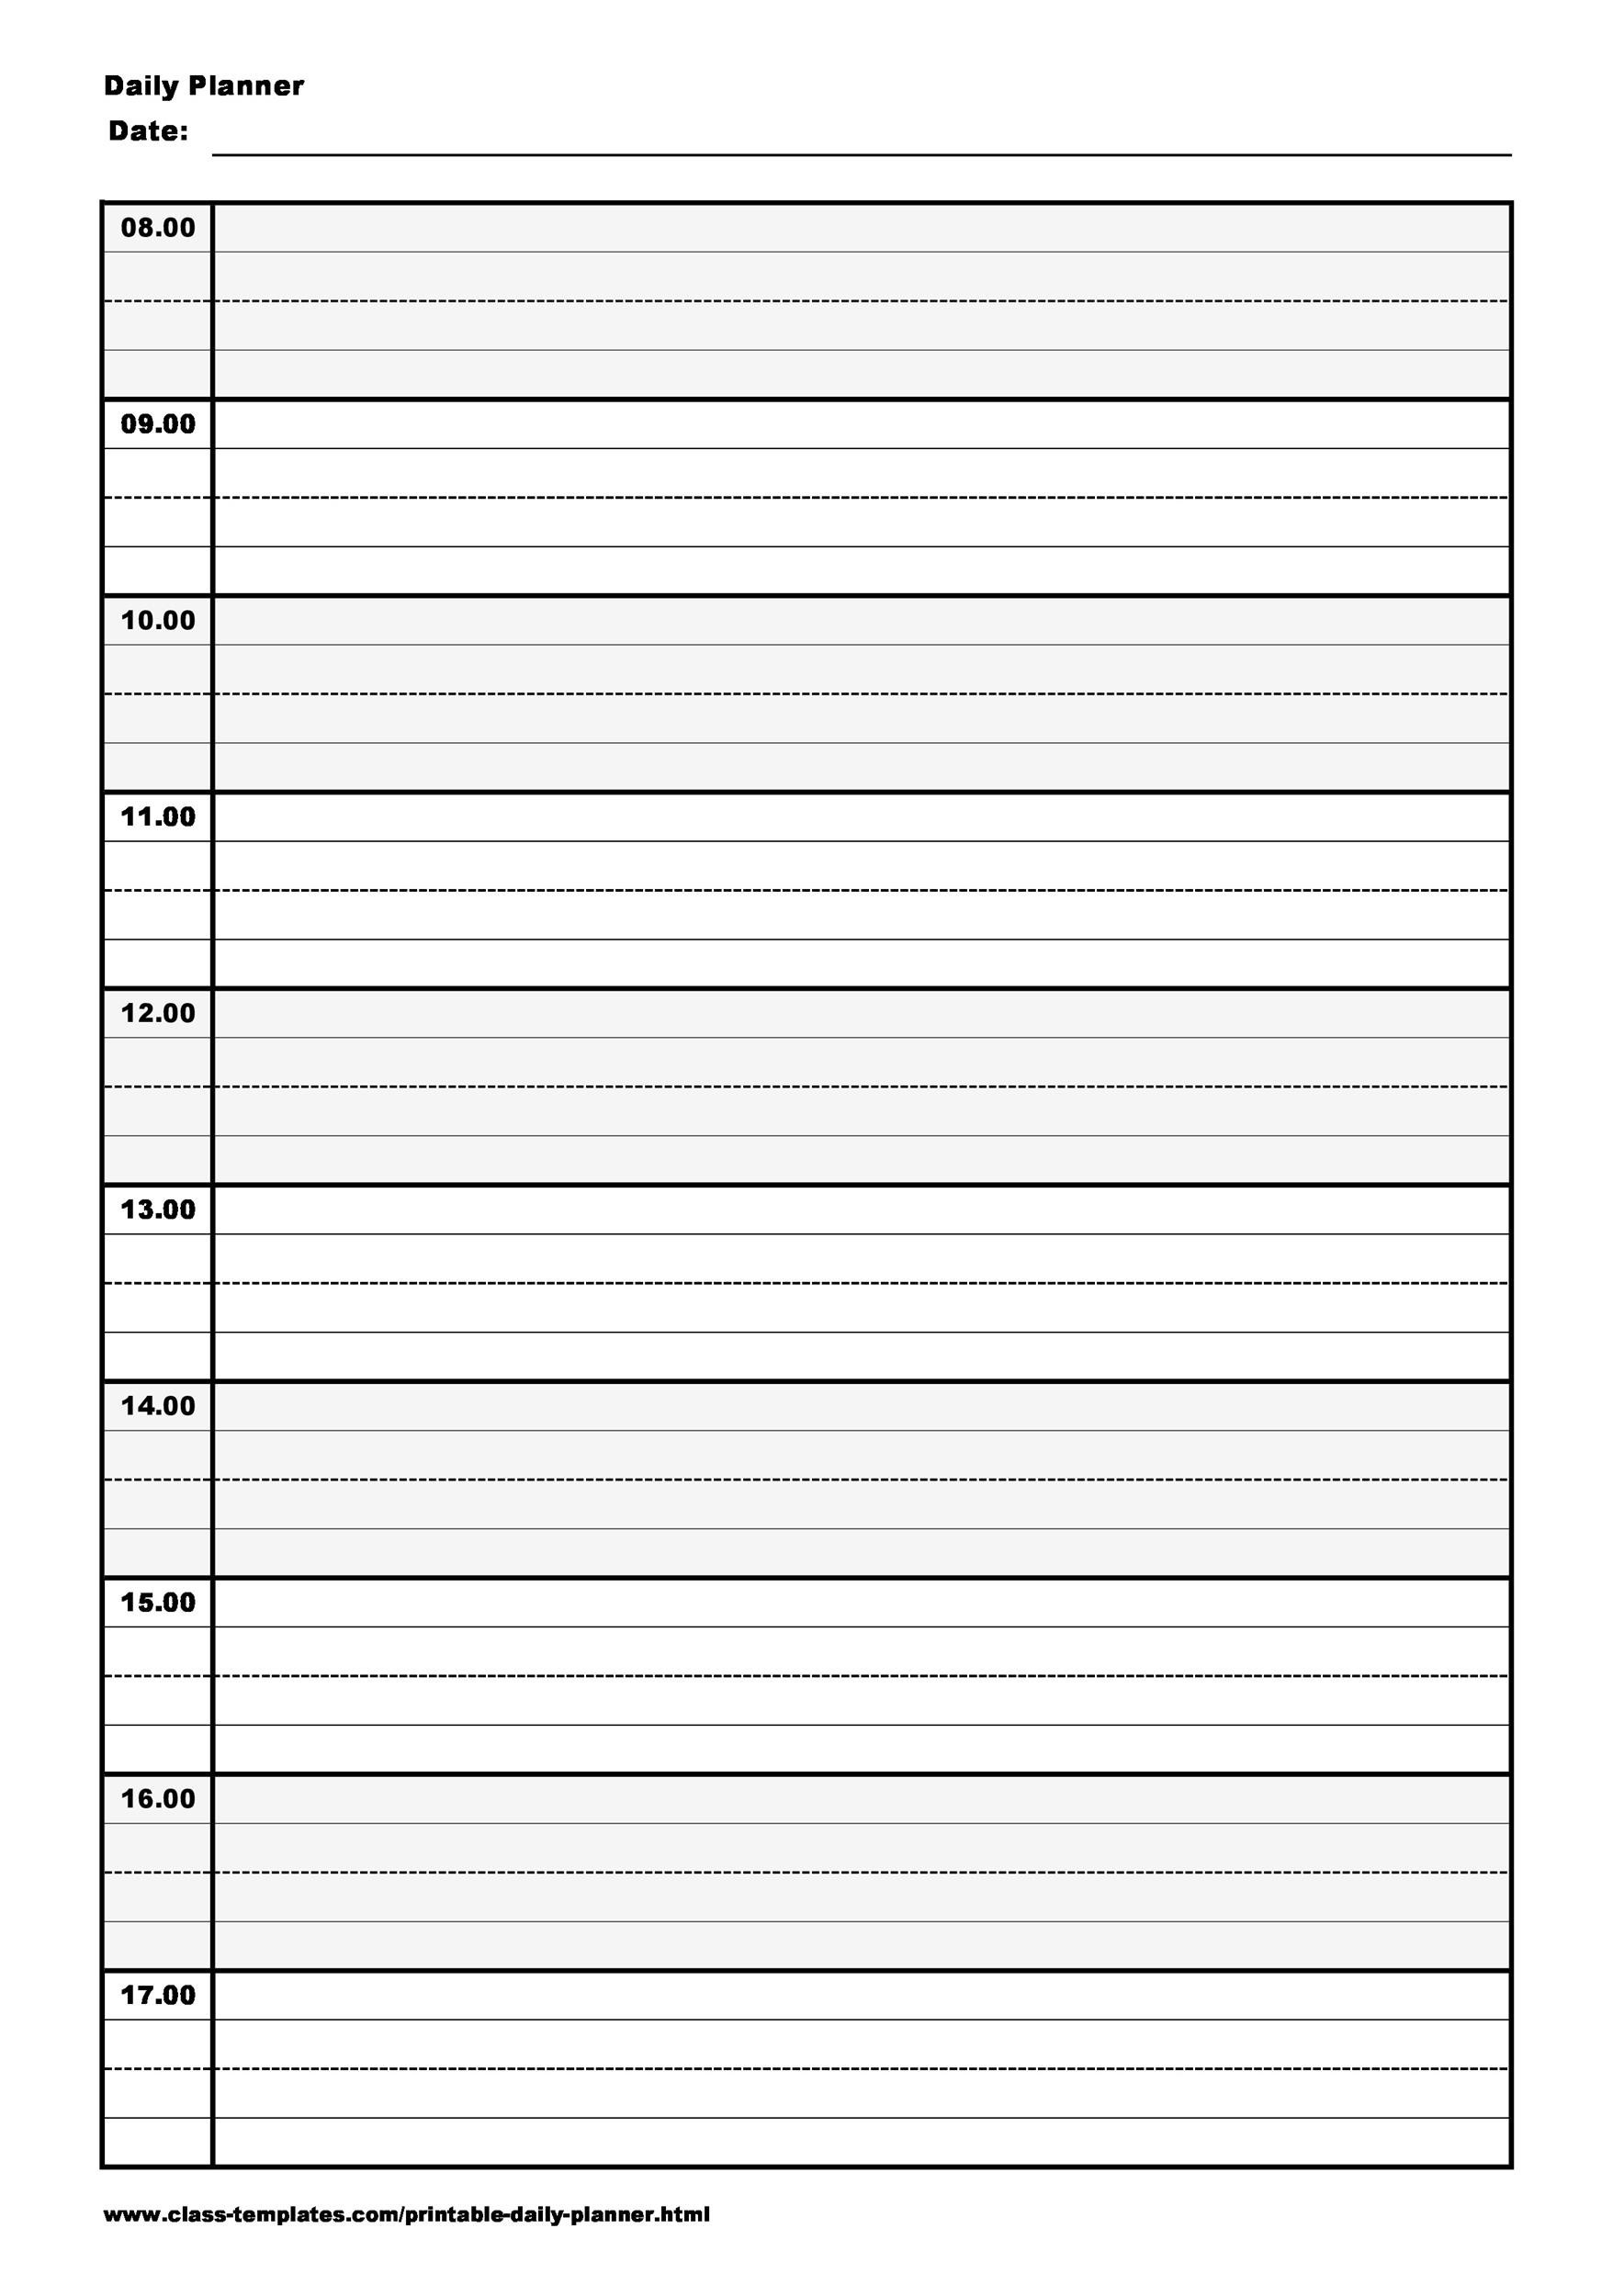 daily-planner-template-printable-free-printable-templates